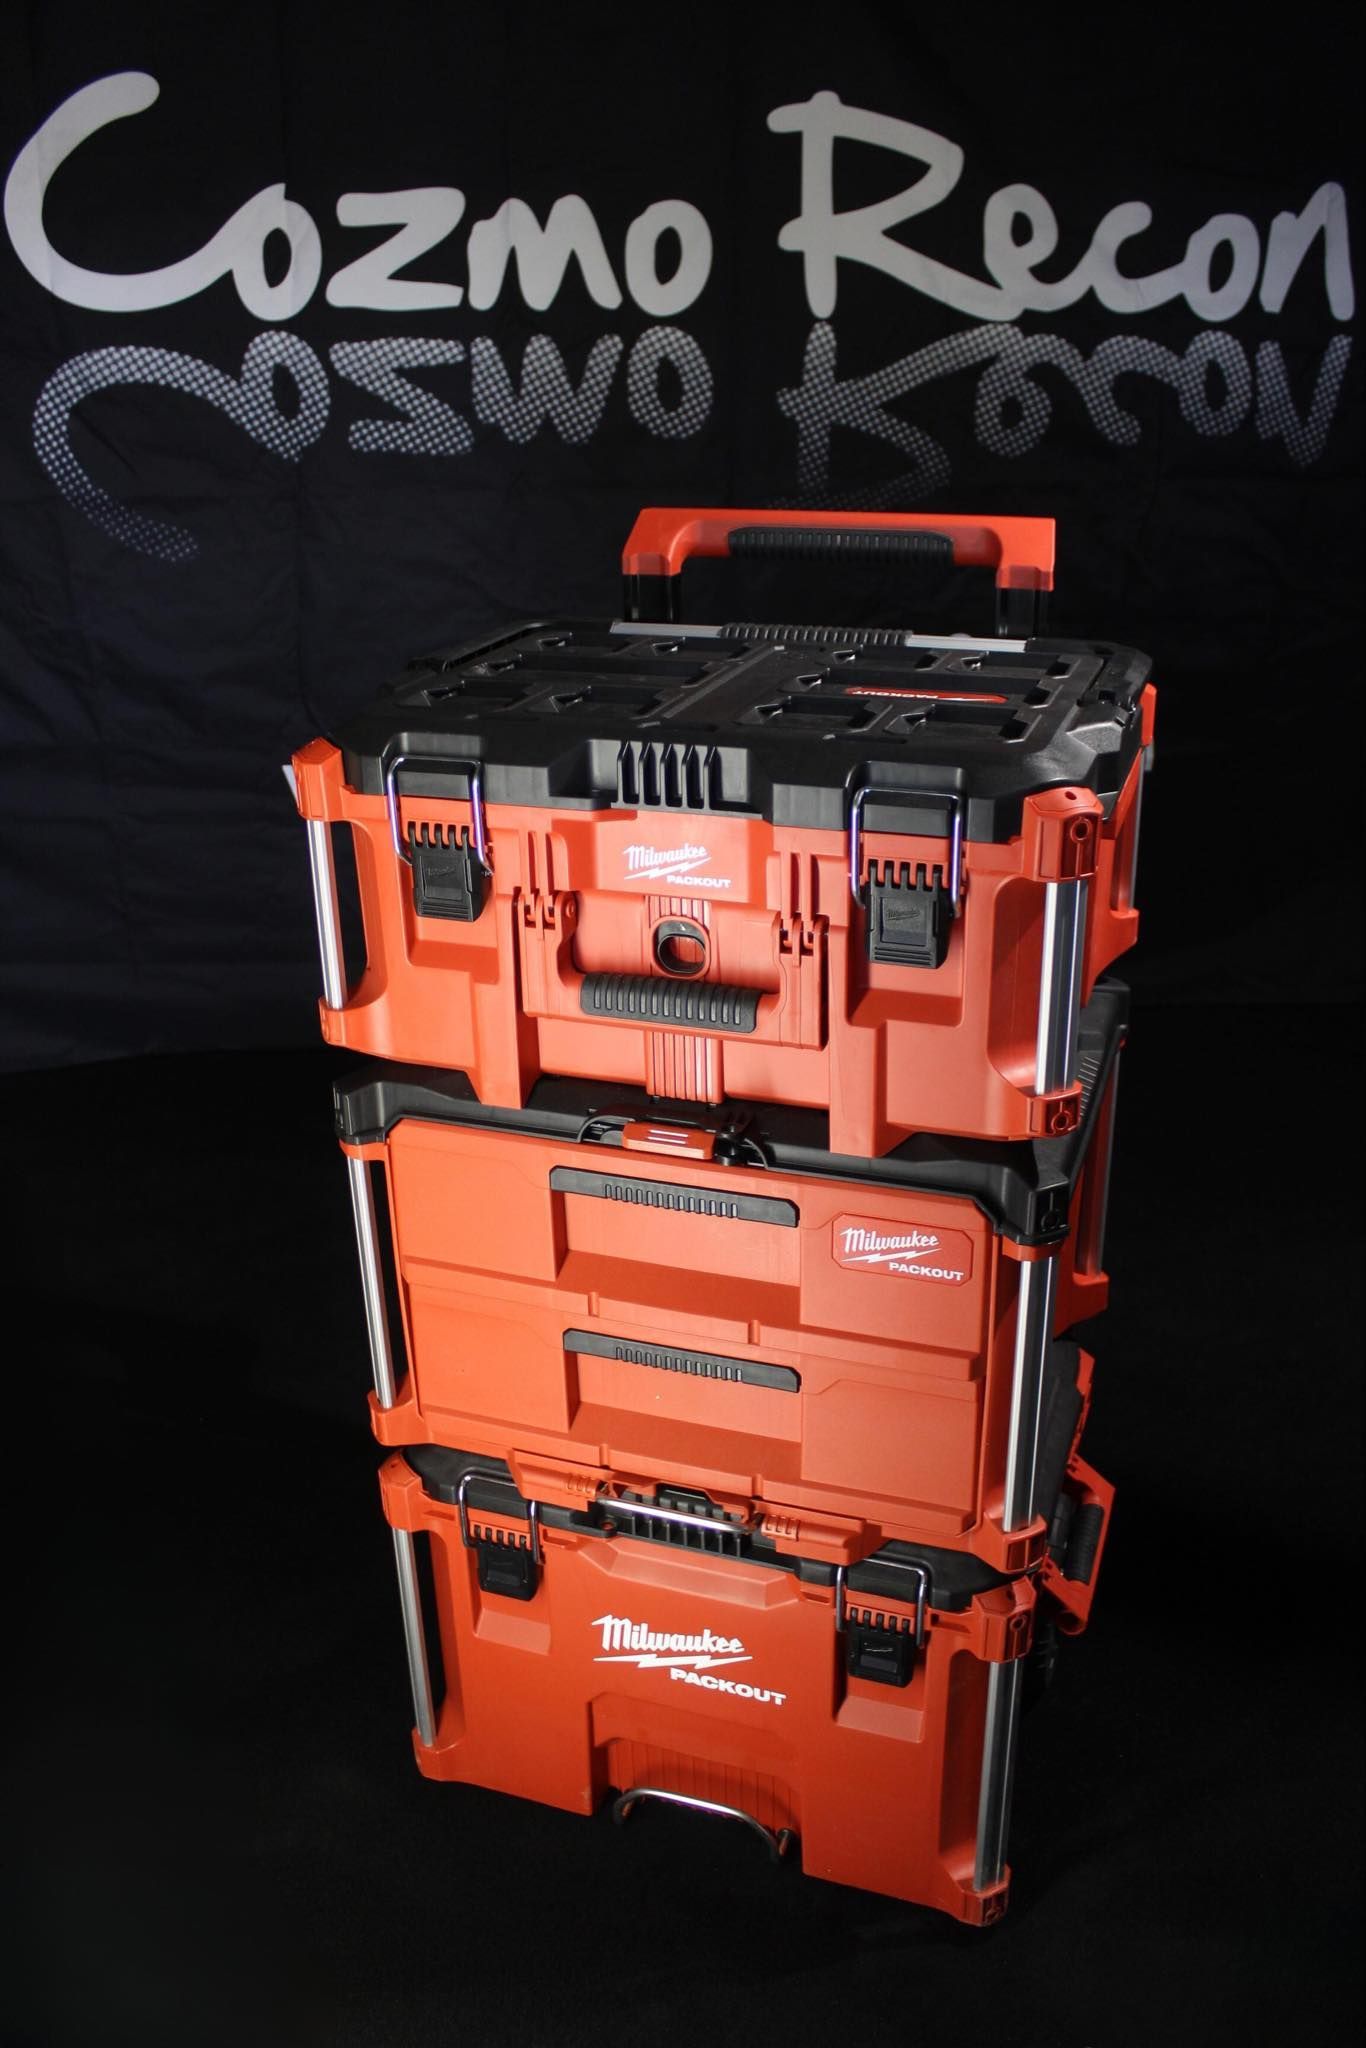 a milwalkee packout with cozmo recon touch up paint correction kit inside .